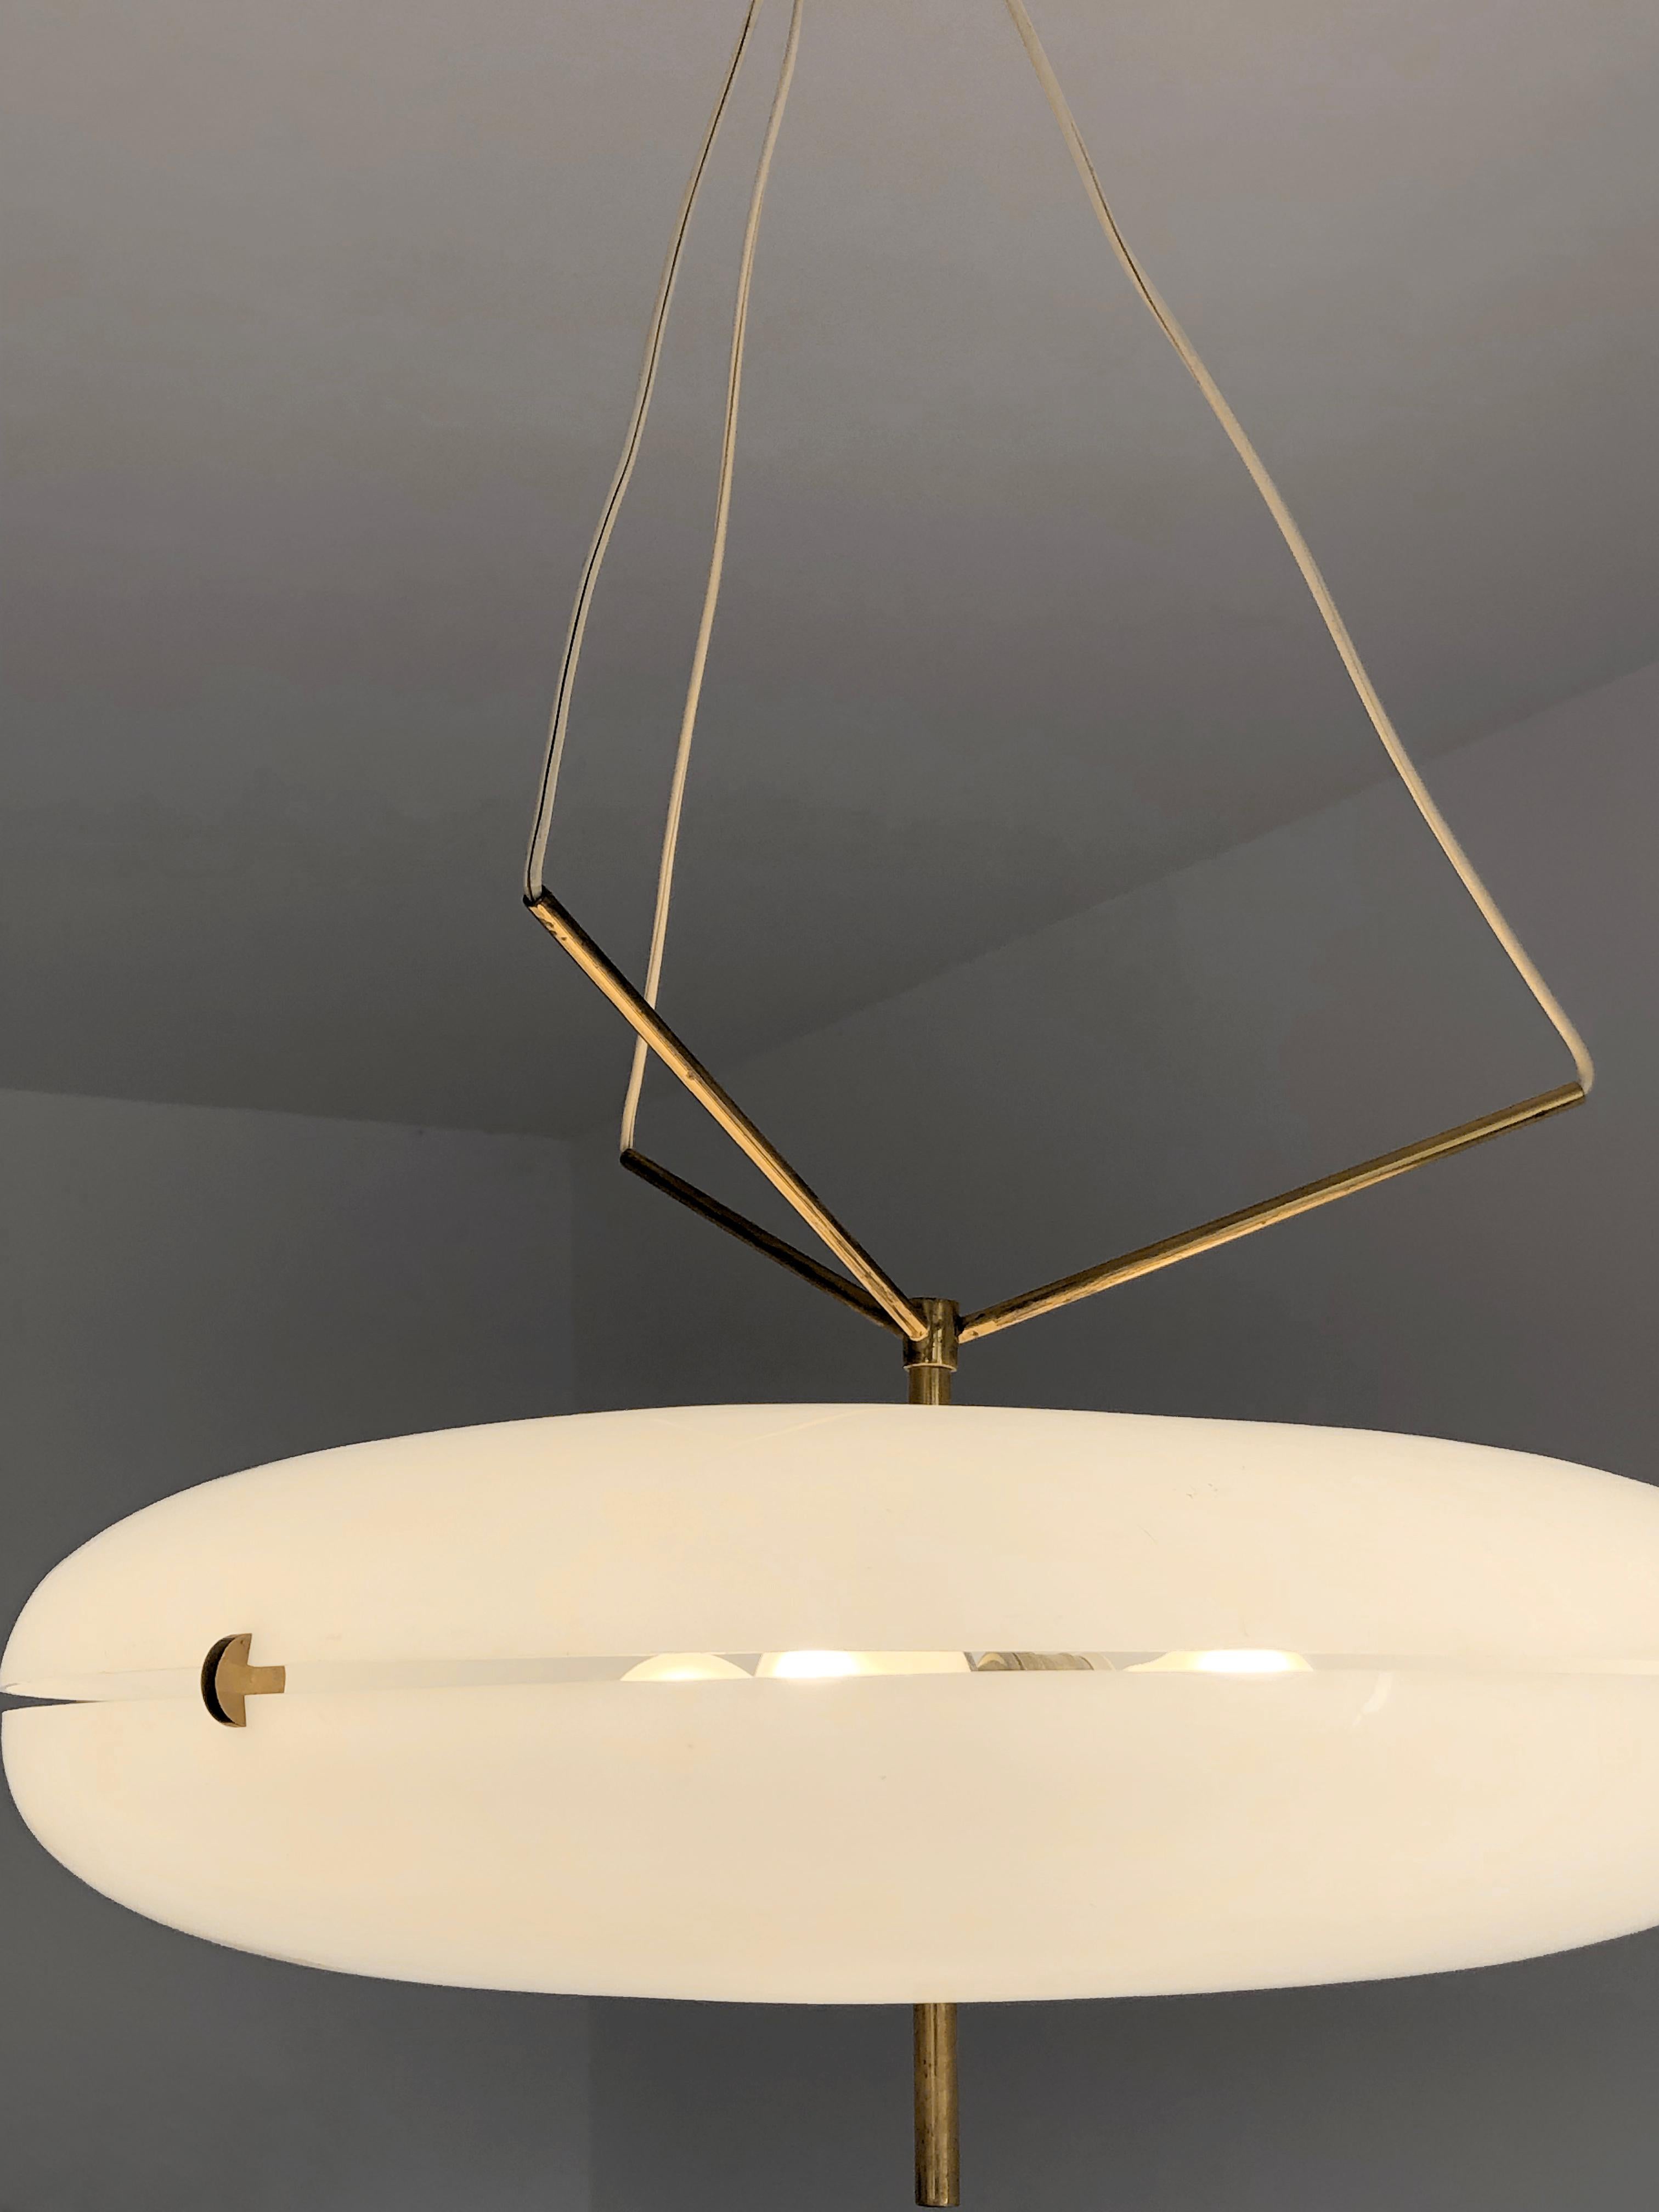 Italian A MID-CENTURY-MODERN MODERNIST SPACE-AGE Ceiling Light by STILNOVO, Italy 1960  For Sale